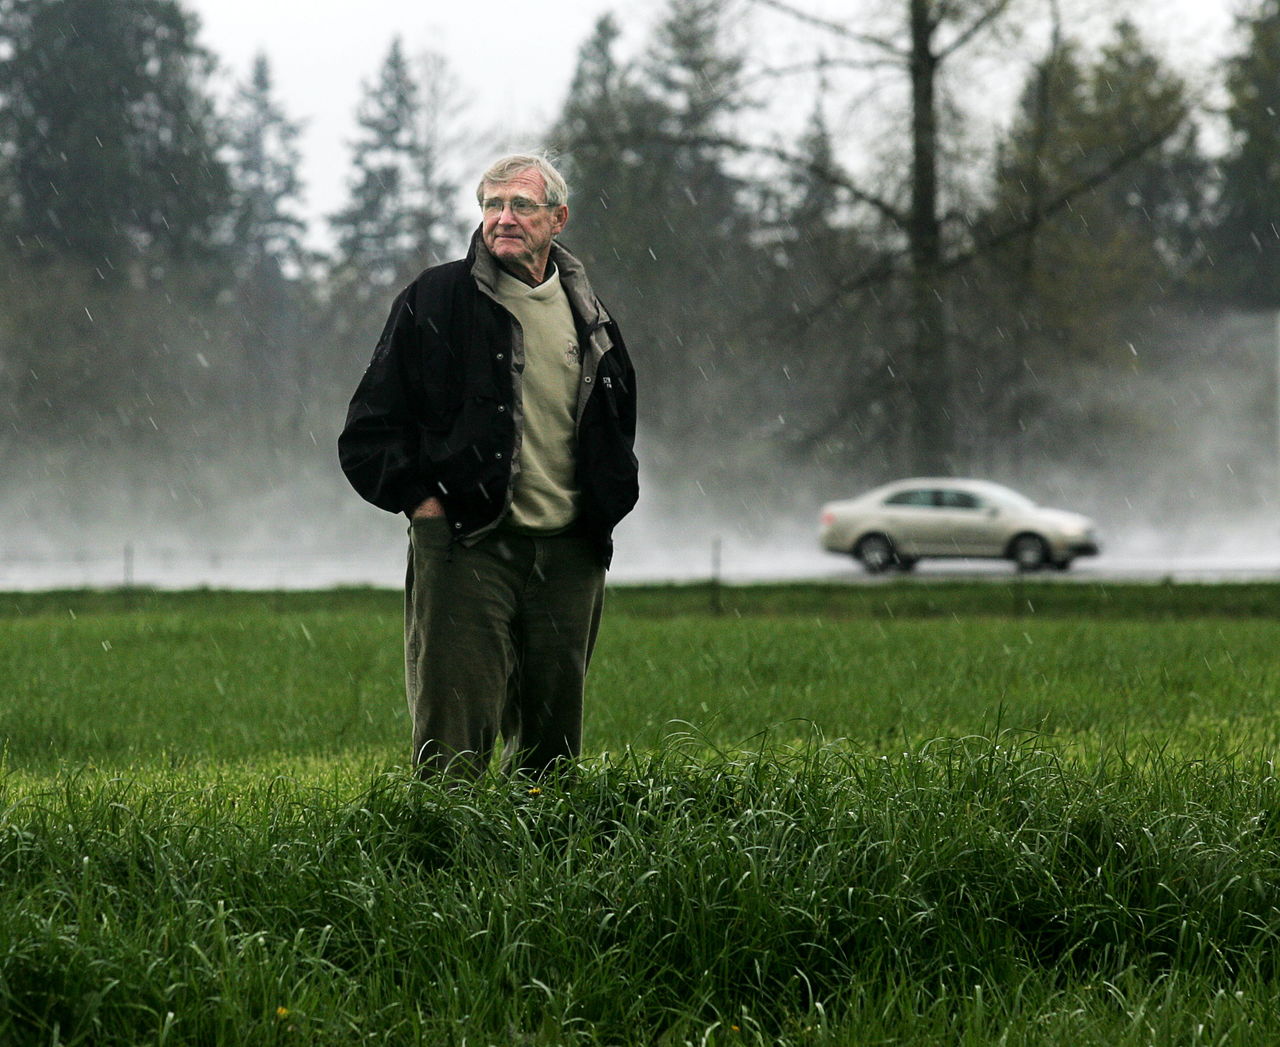 Dwayne Lane, seen here in 2007, invested years to get commercial zoning on land he purchased next to I-5 at Island Crossing. The dealership finally opened in fall 2015.